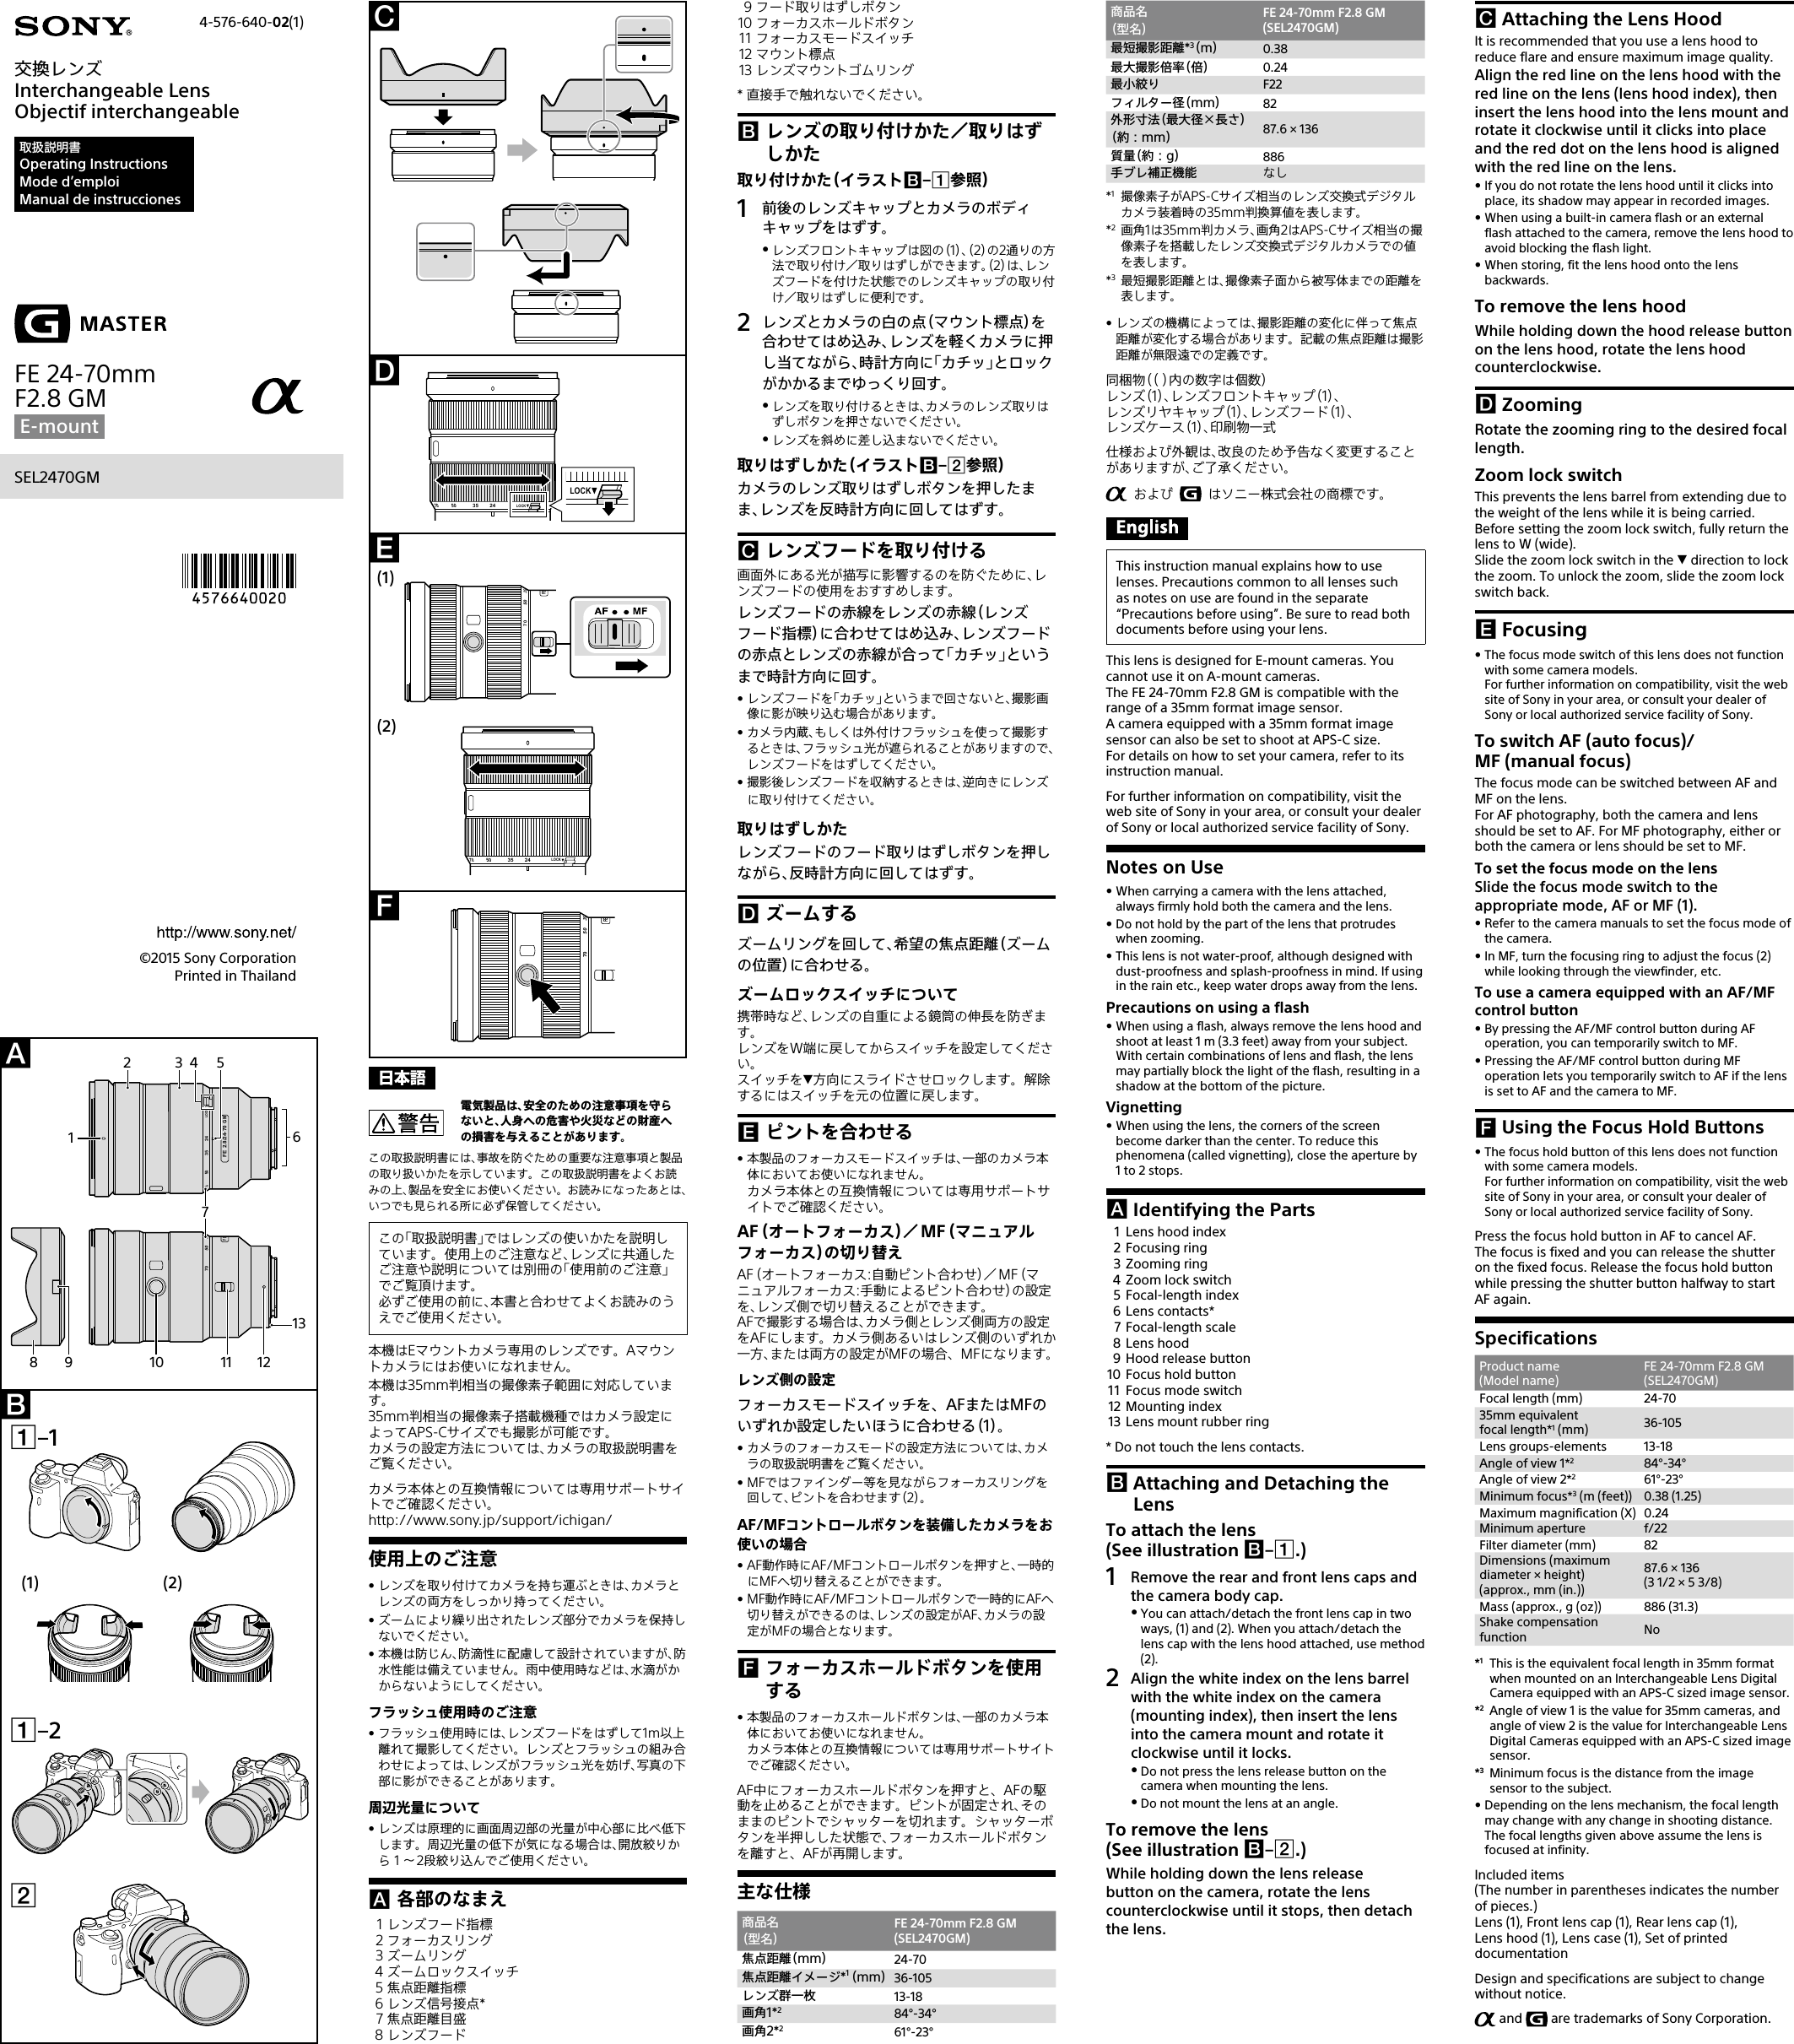 Page 1 of 2 - Sony SEL2470GM User Manual Operating Instructions 4576640021